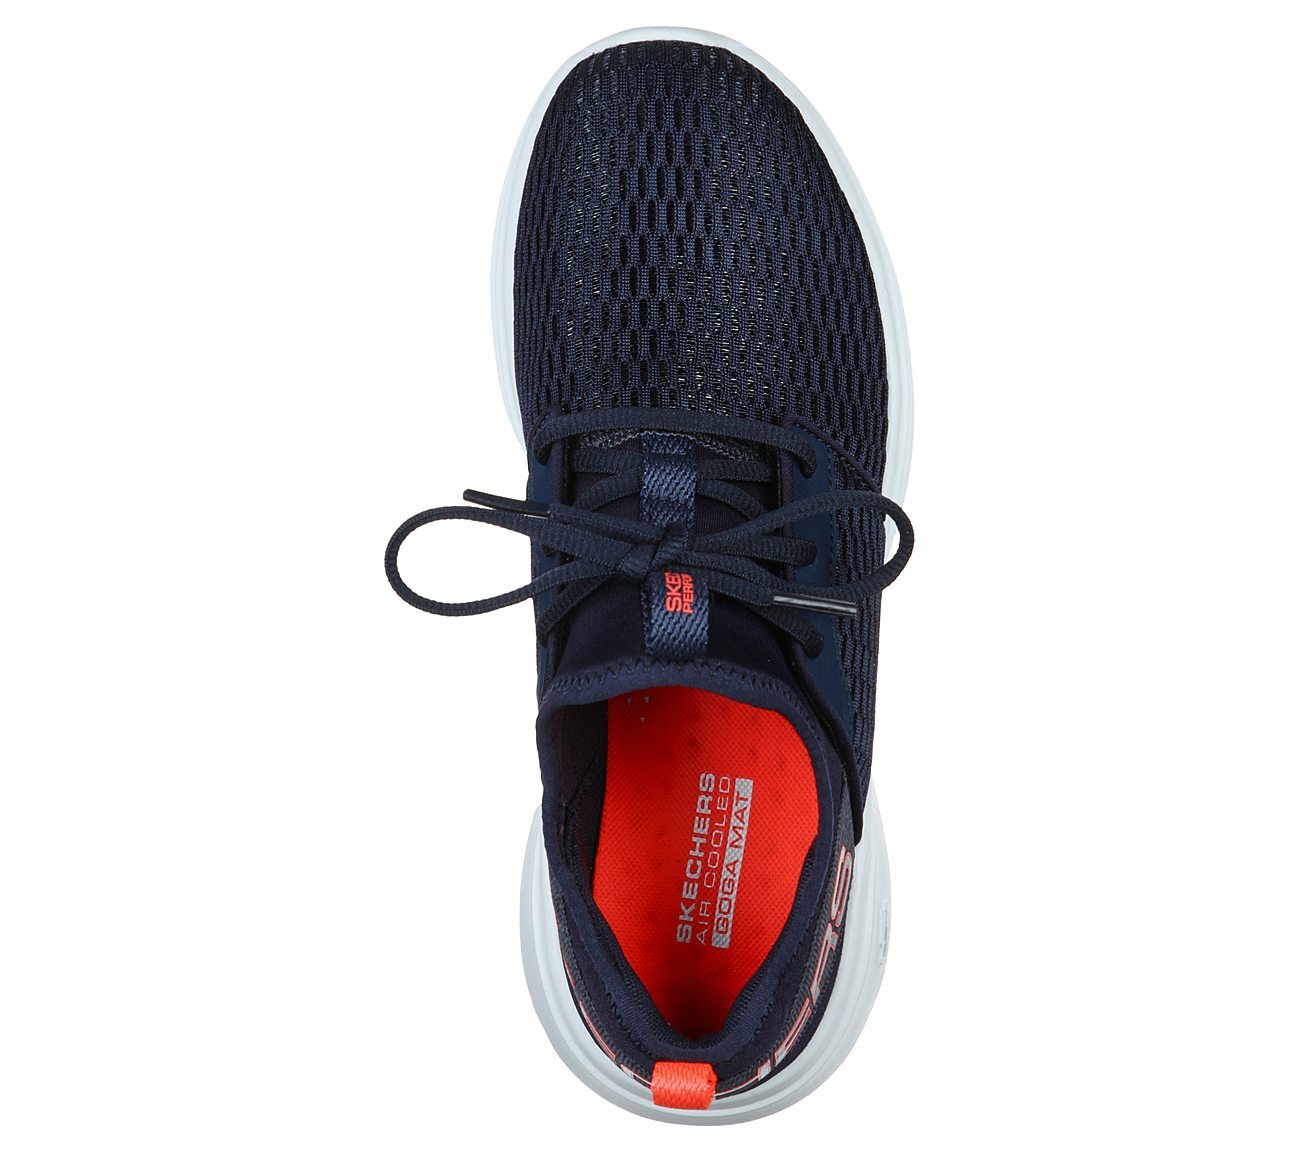 GO RUN FAST - GLIMMER, NAVY/CORAL Footwear Top View